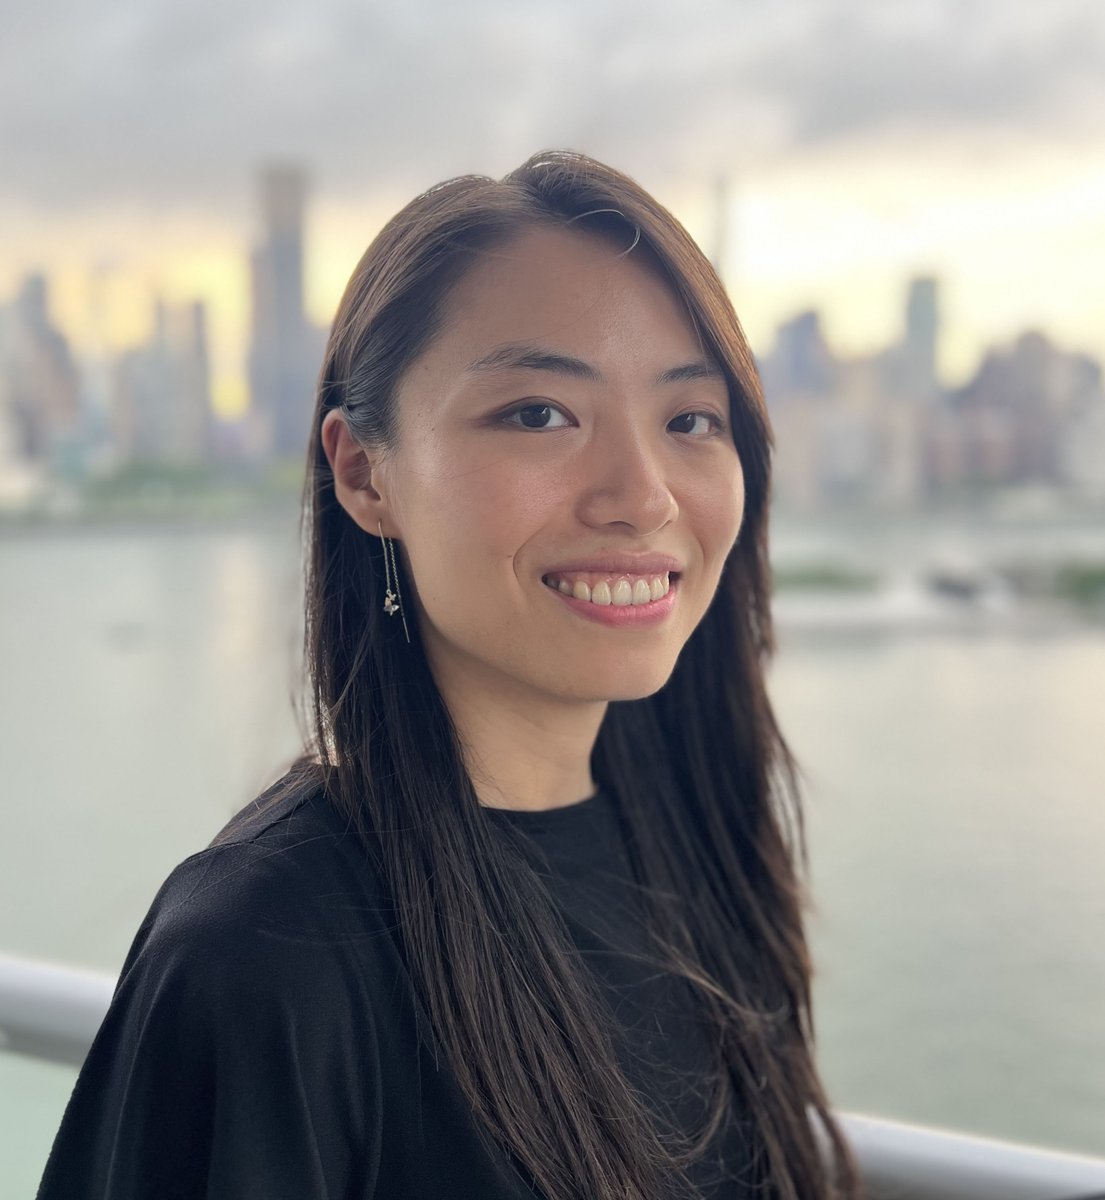 Congratulations to our postdoc, Wenhui Qu, for receiving the @_BrightFocus postdoctoral fellowship award in Alzheimer’s disease! What a great way to wrap up your first year in the lab, with excitement for discoveries to come!